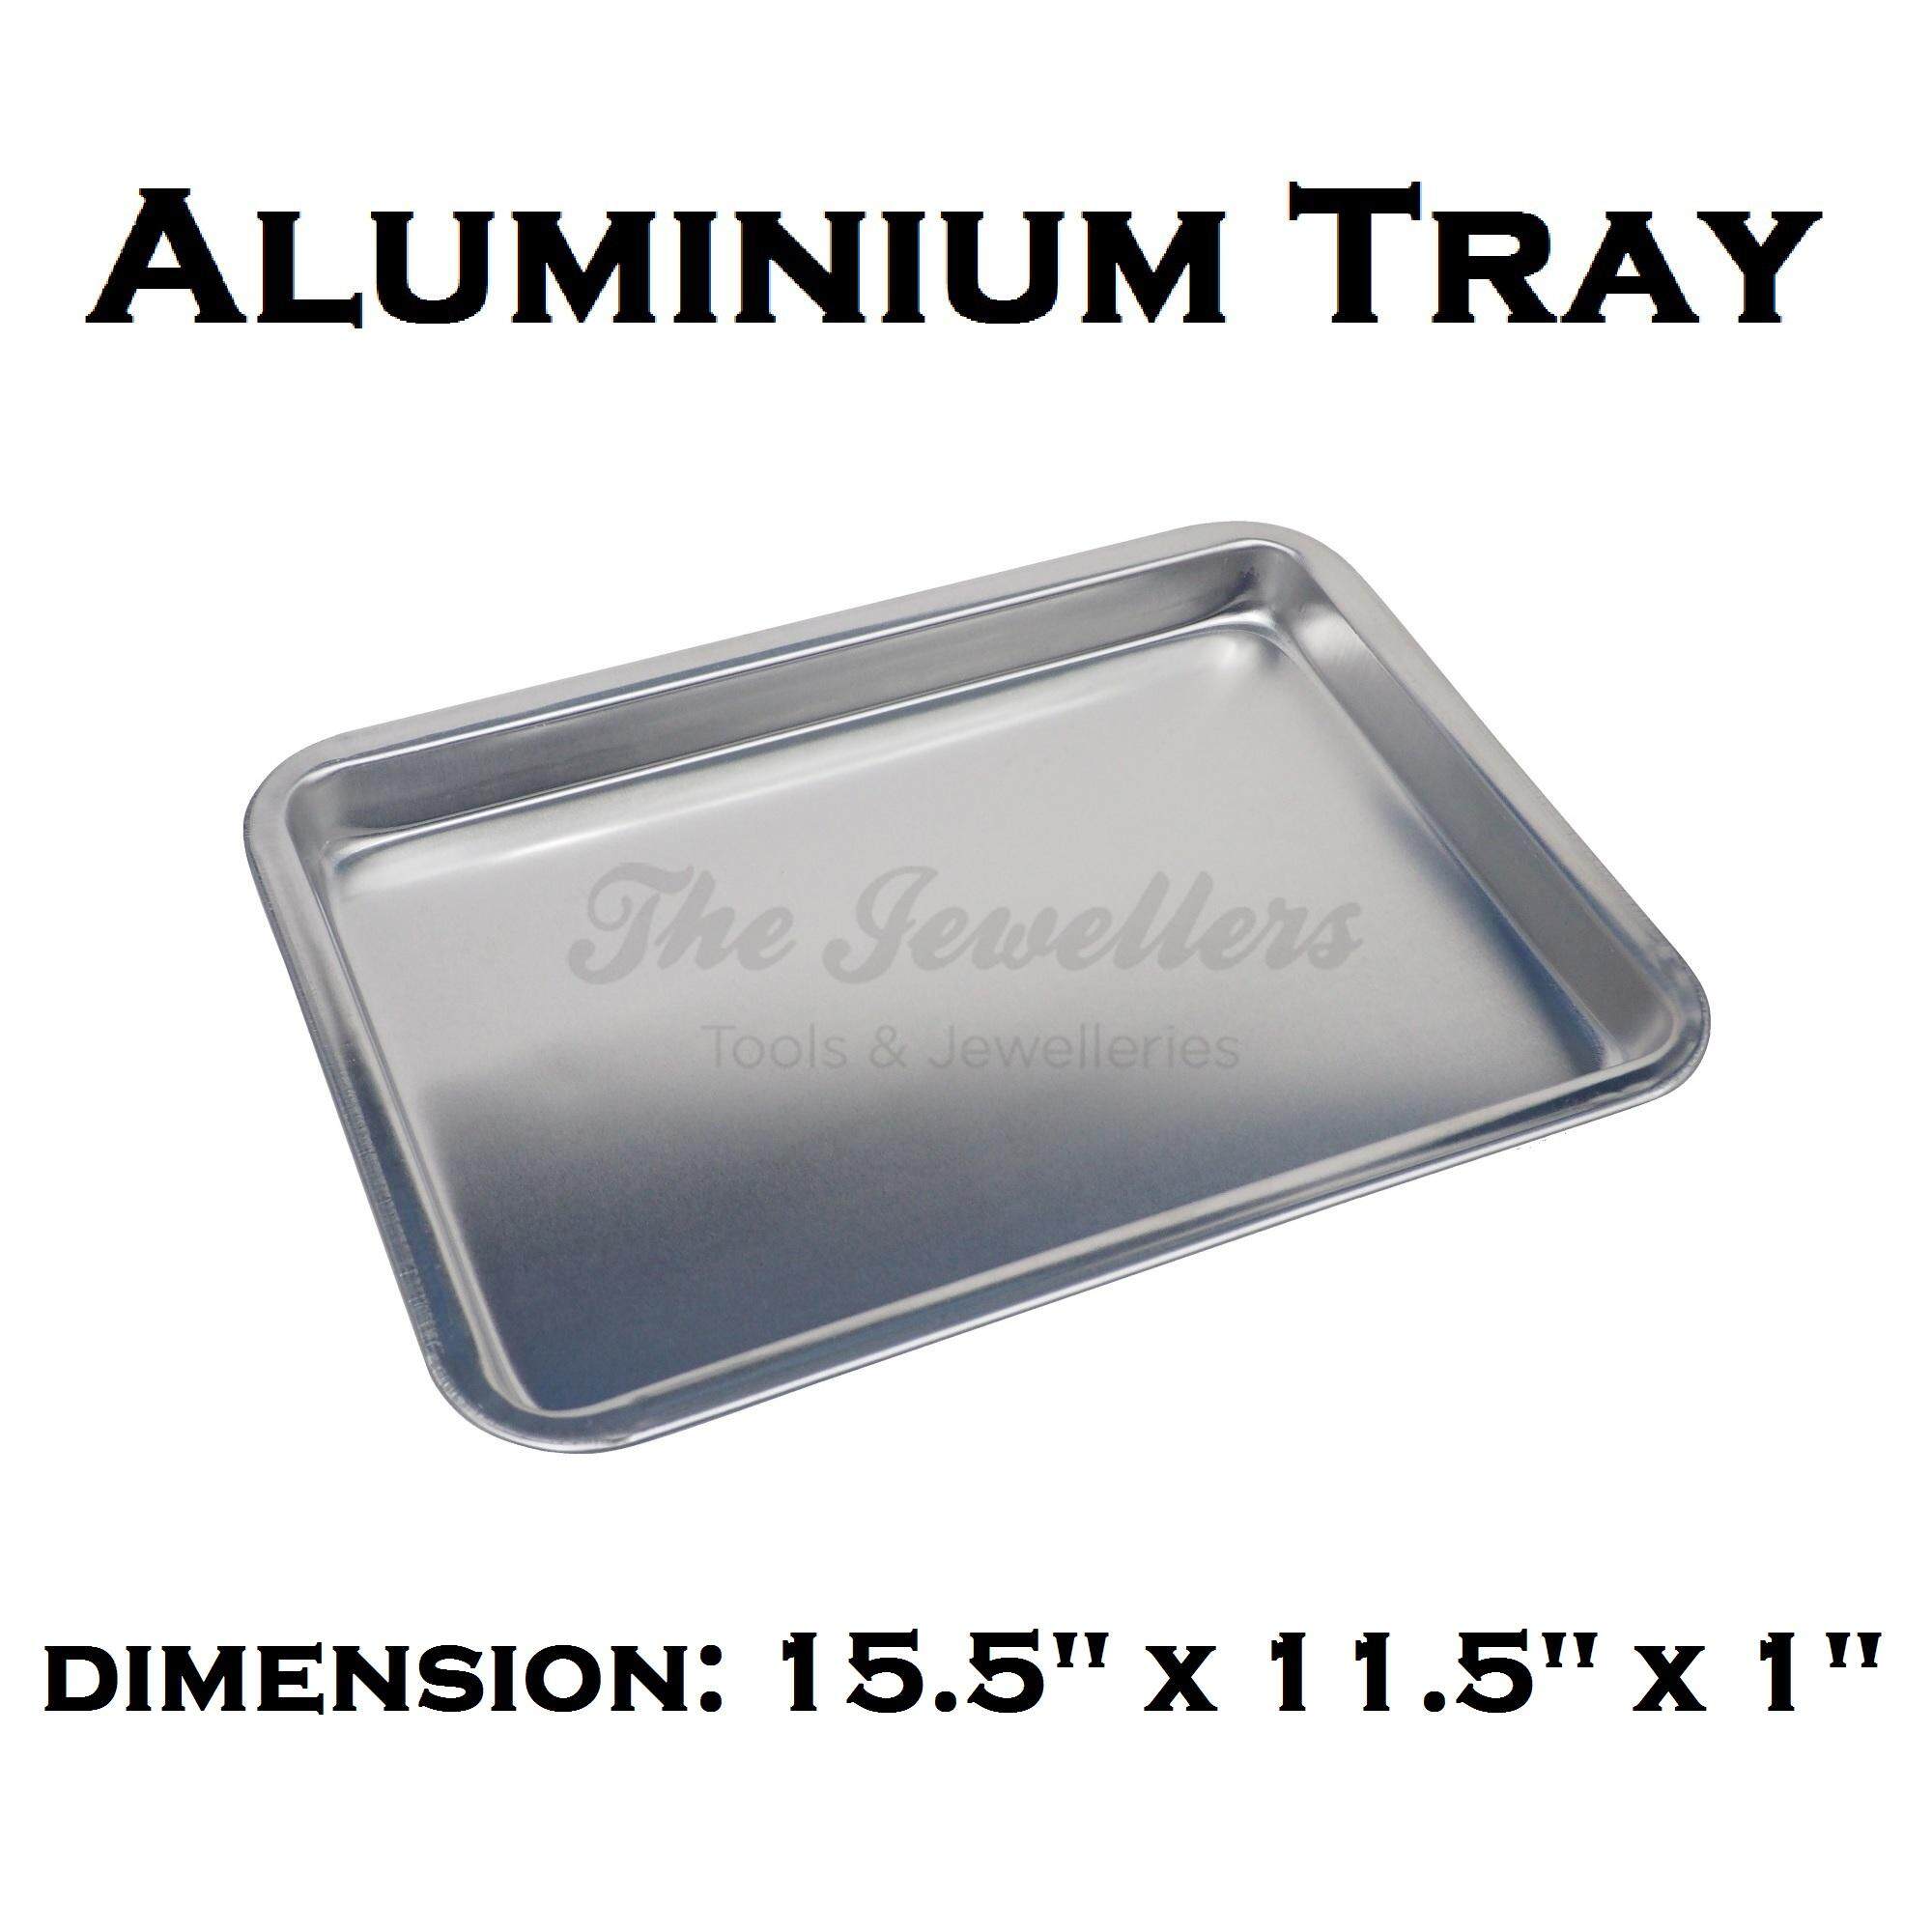 Aluminium Tray Bakeware Oven Sheet, Baking Pan Tray for Cookies, Pizza, and Cakes Dimension: 15.5